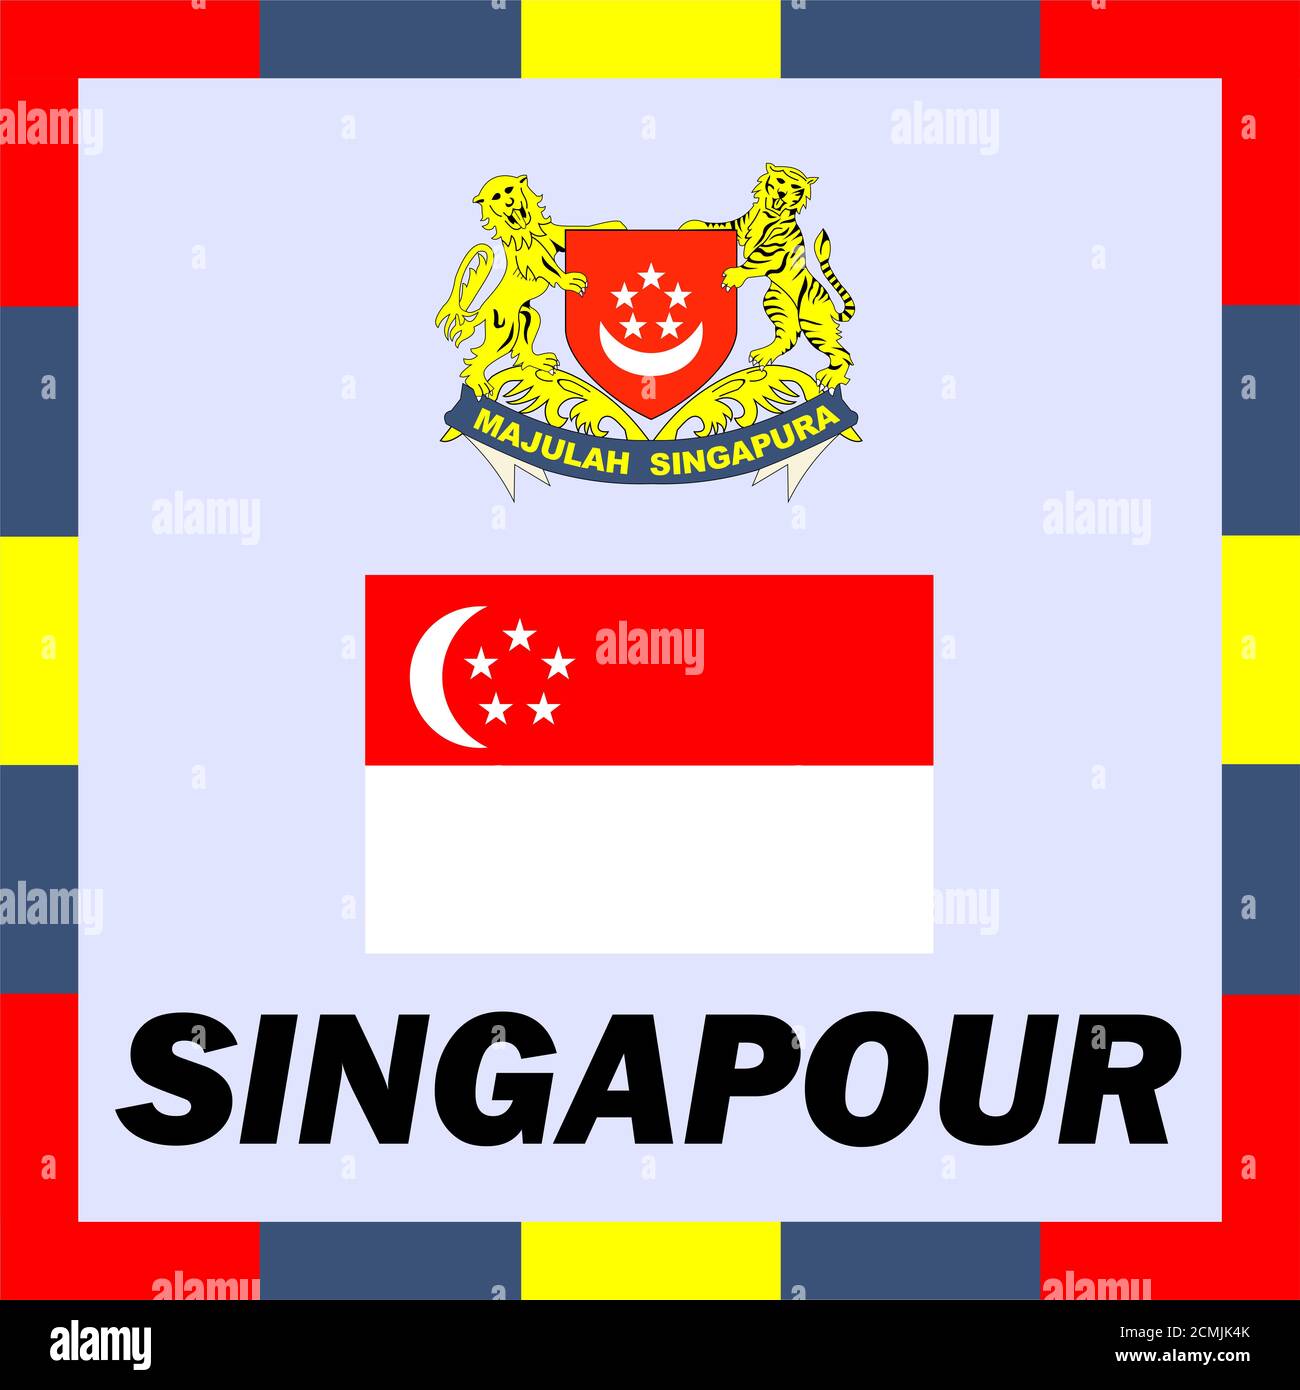 Official ensigns, flag and coat of arm of Singapour Stock Photo